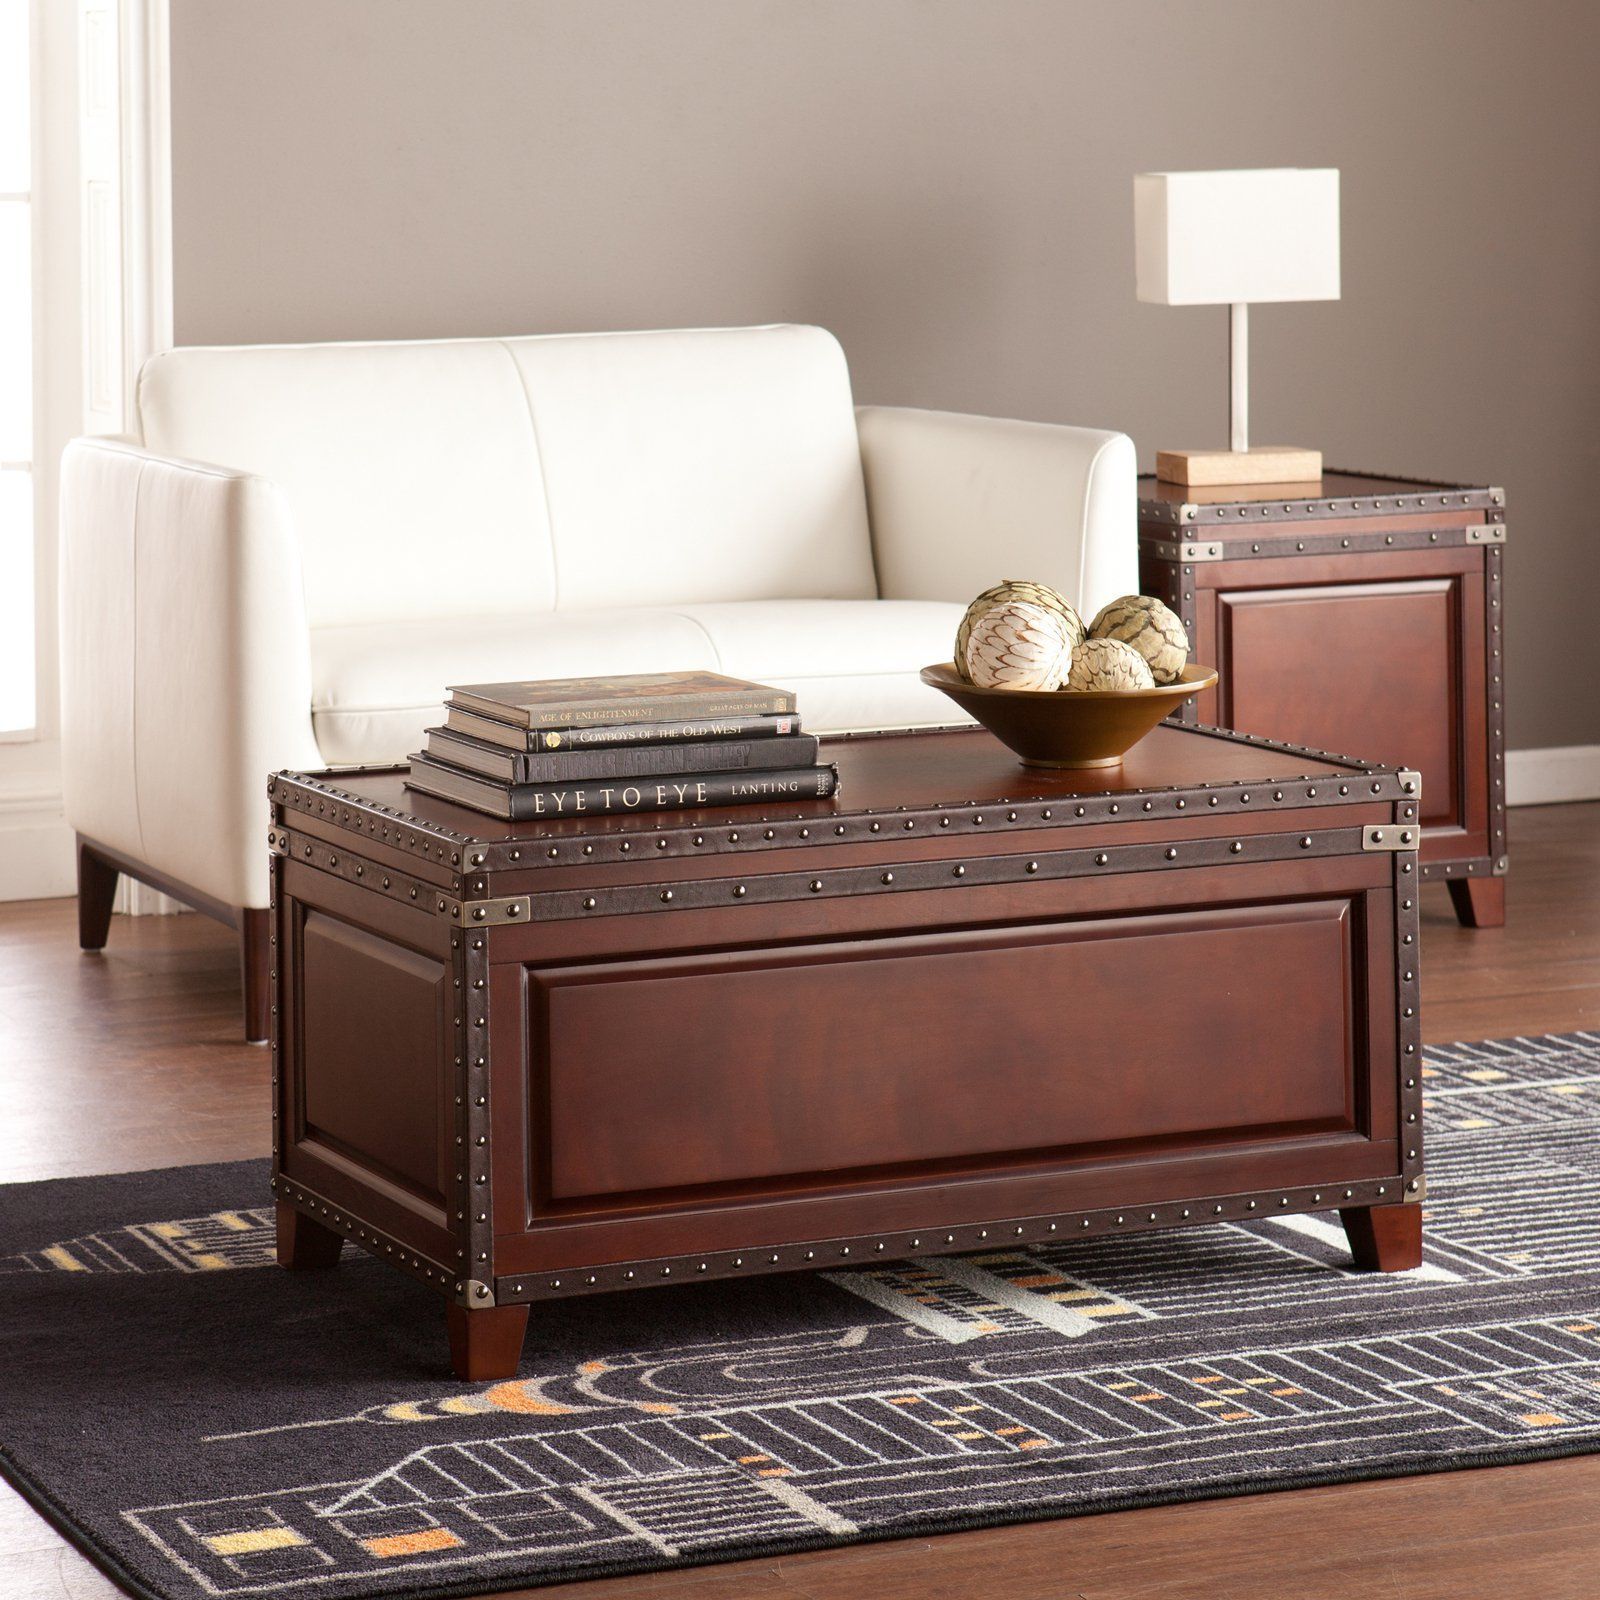 Southern Enterprises Amherst Trunk Coffee Table | From Hayneedle Throughout Southern Enterprises Larksmill Coffee Tables (View 3 of 20)